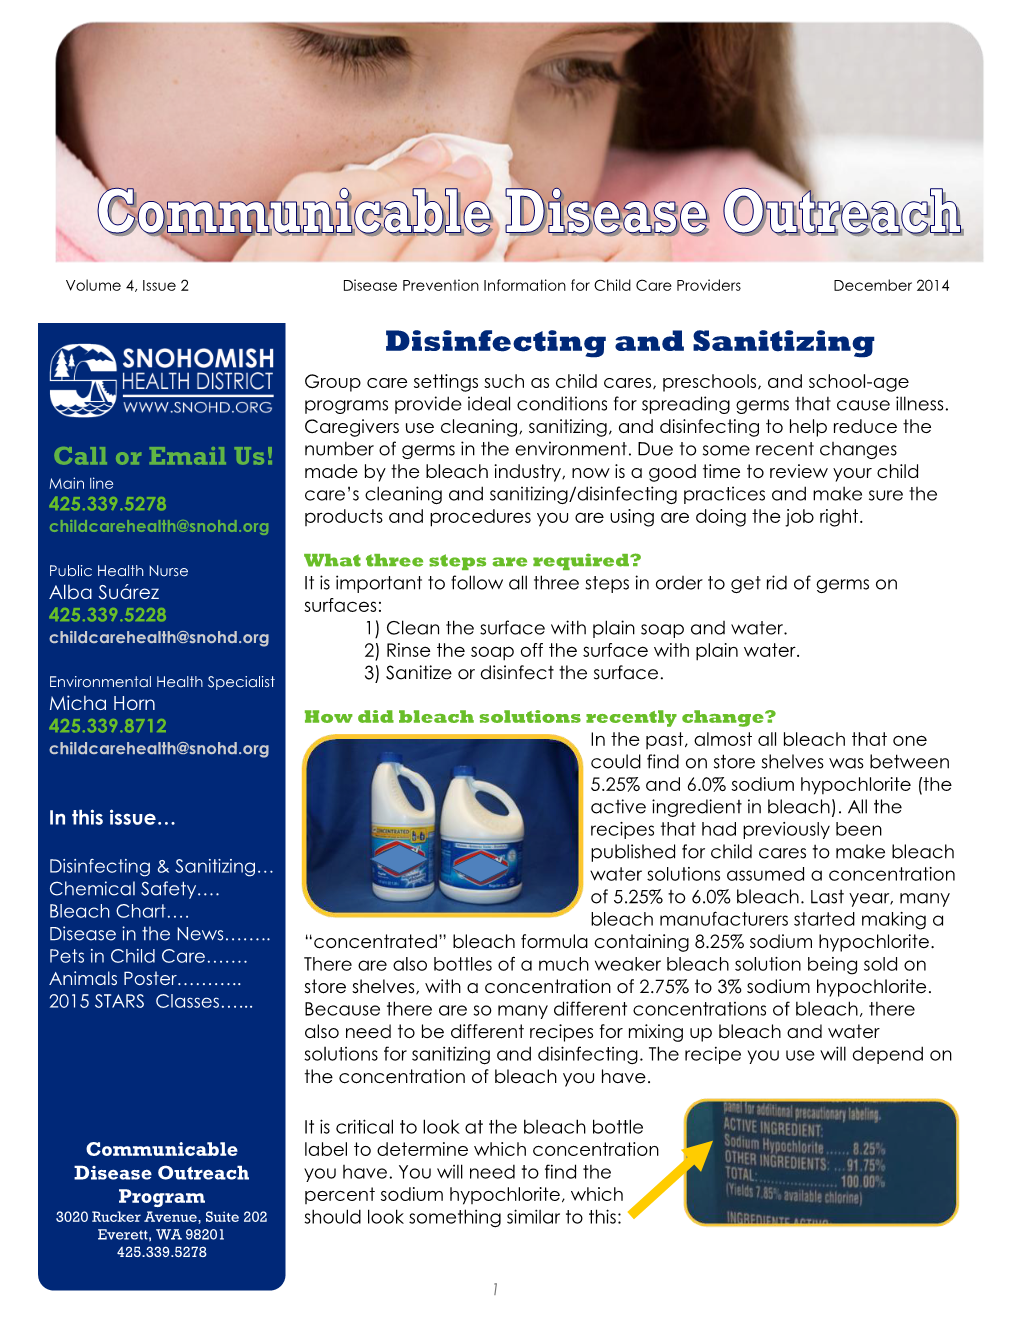 Disinfecting and Sanitizing